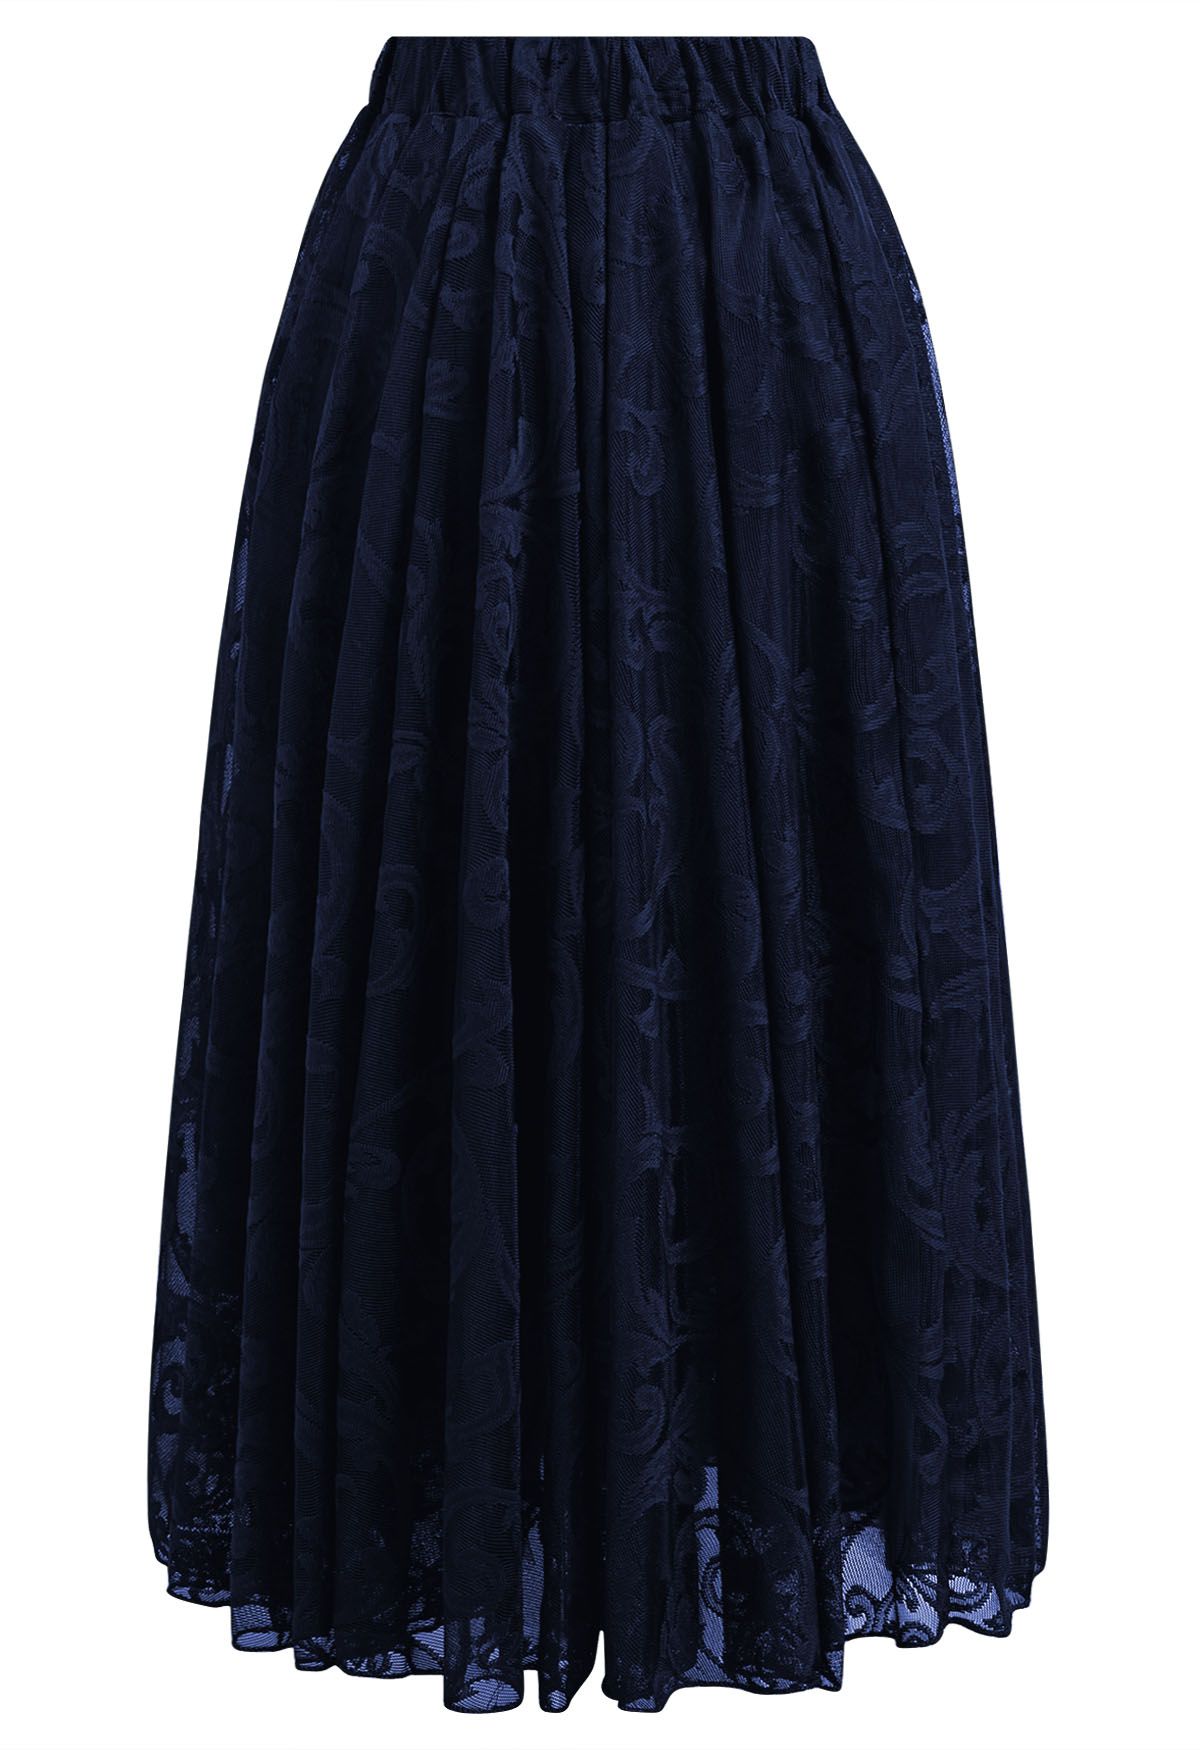 Sophisticated Floral Mesh Tulle Midi Skirt in Navy - Retro, Indie and ...